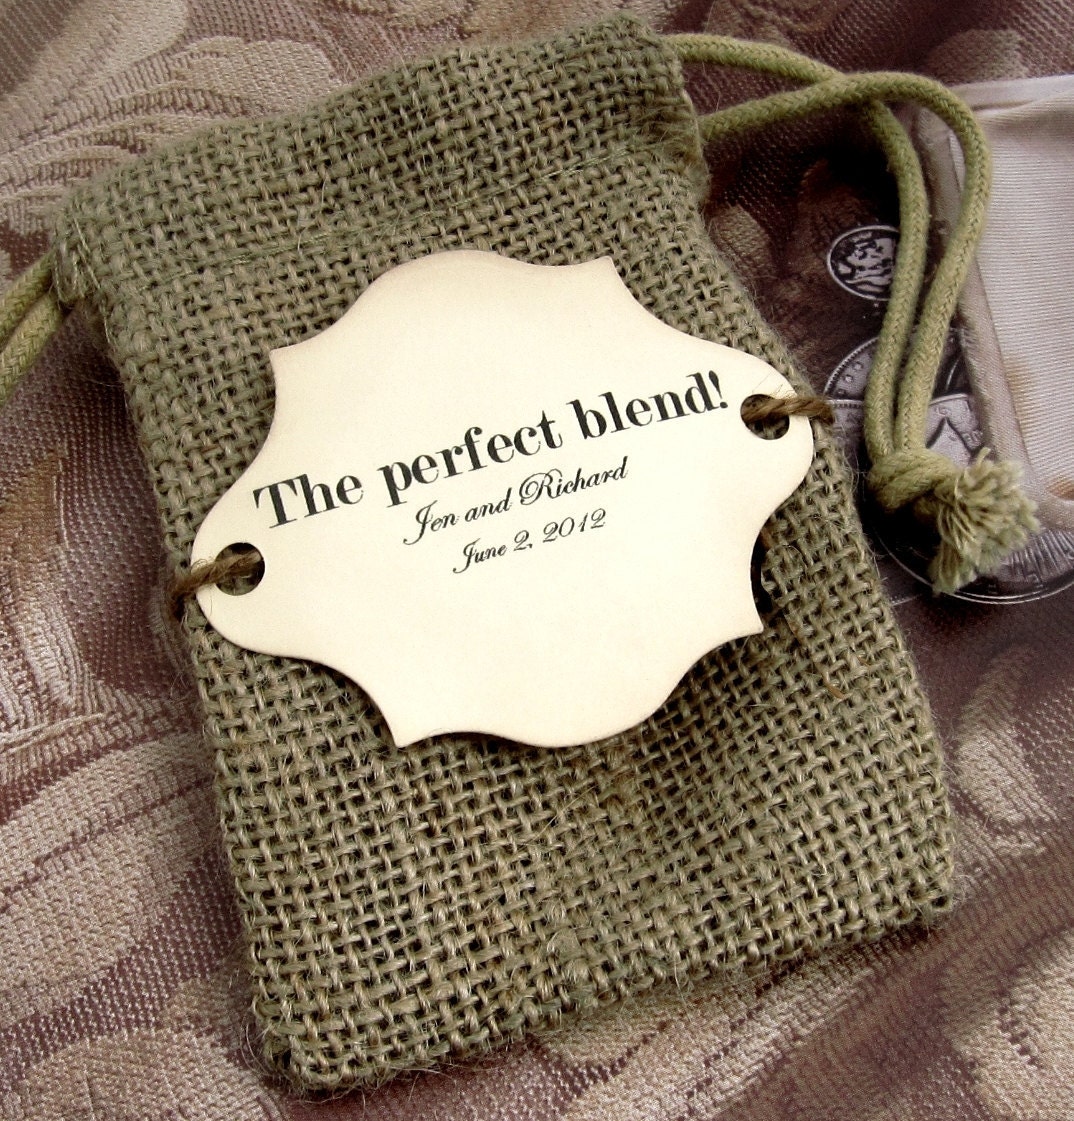 20 Burlap Wedding Favor Bags - The perfect blend - Personalized